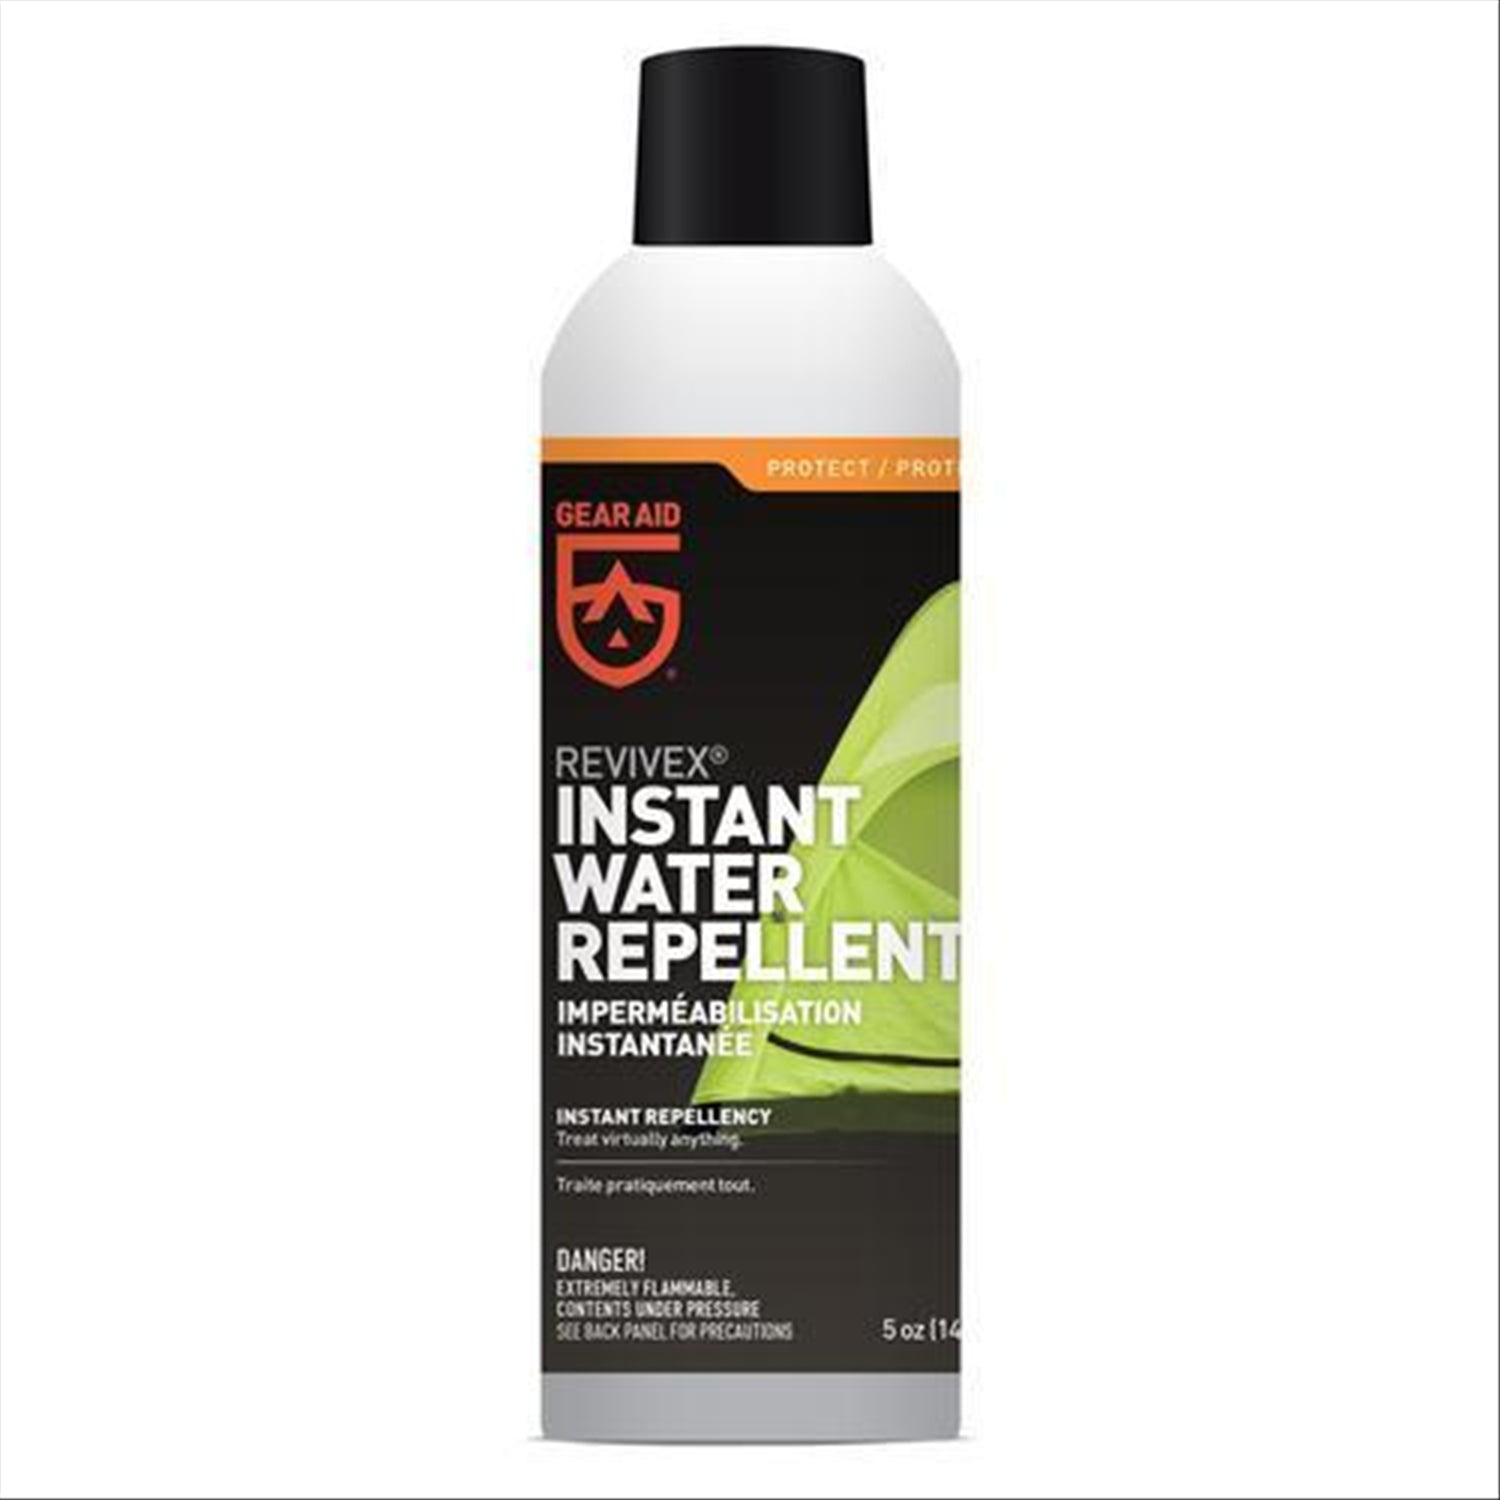 Gear Aid Instant Water Repellent